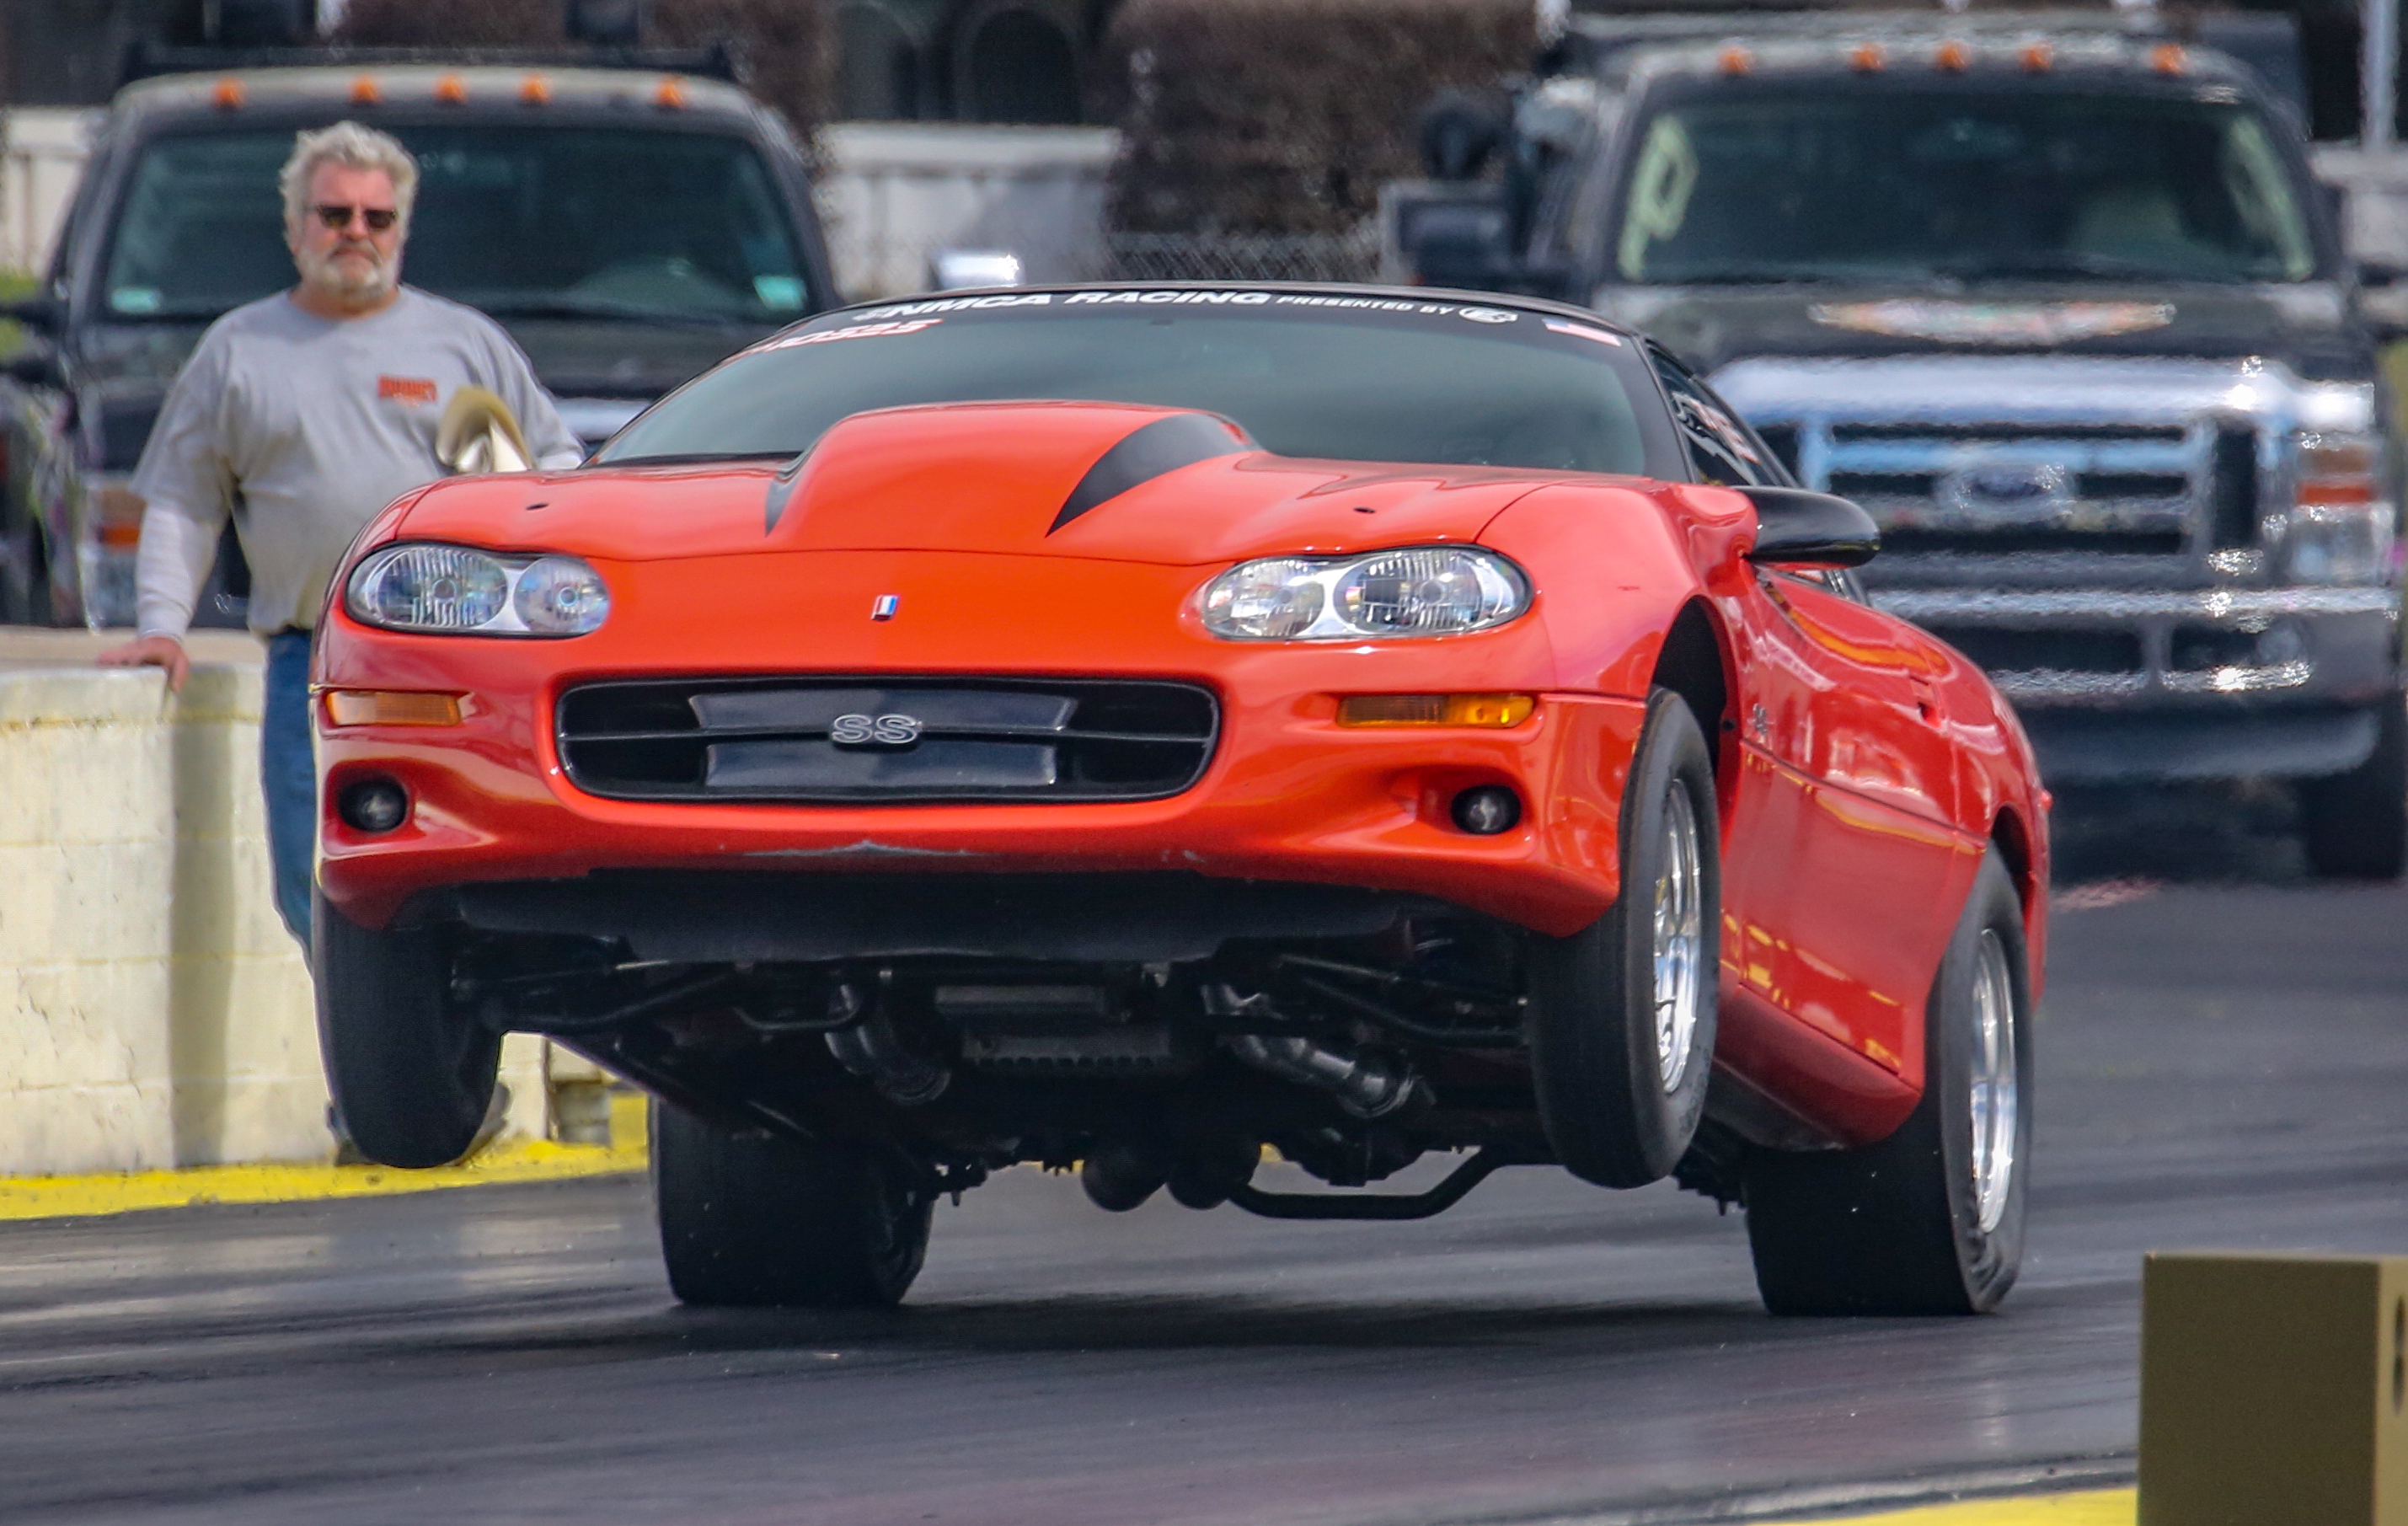 NMCA HOSTS 2019 CHEVROLET PERFORMANCE CHALLENG SERIES AT FIVE 2019 EVENTS ...2858 x 1811